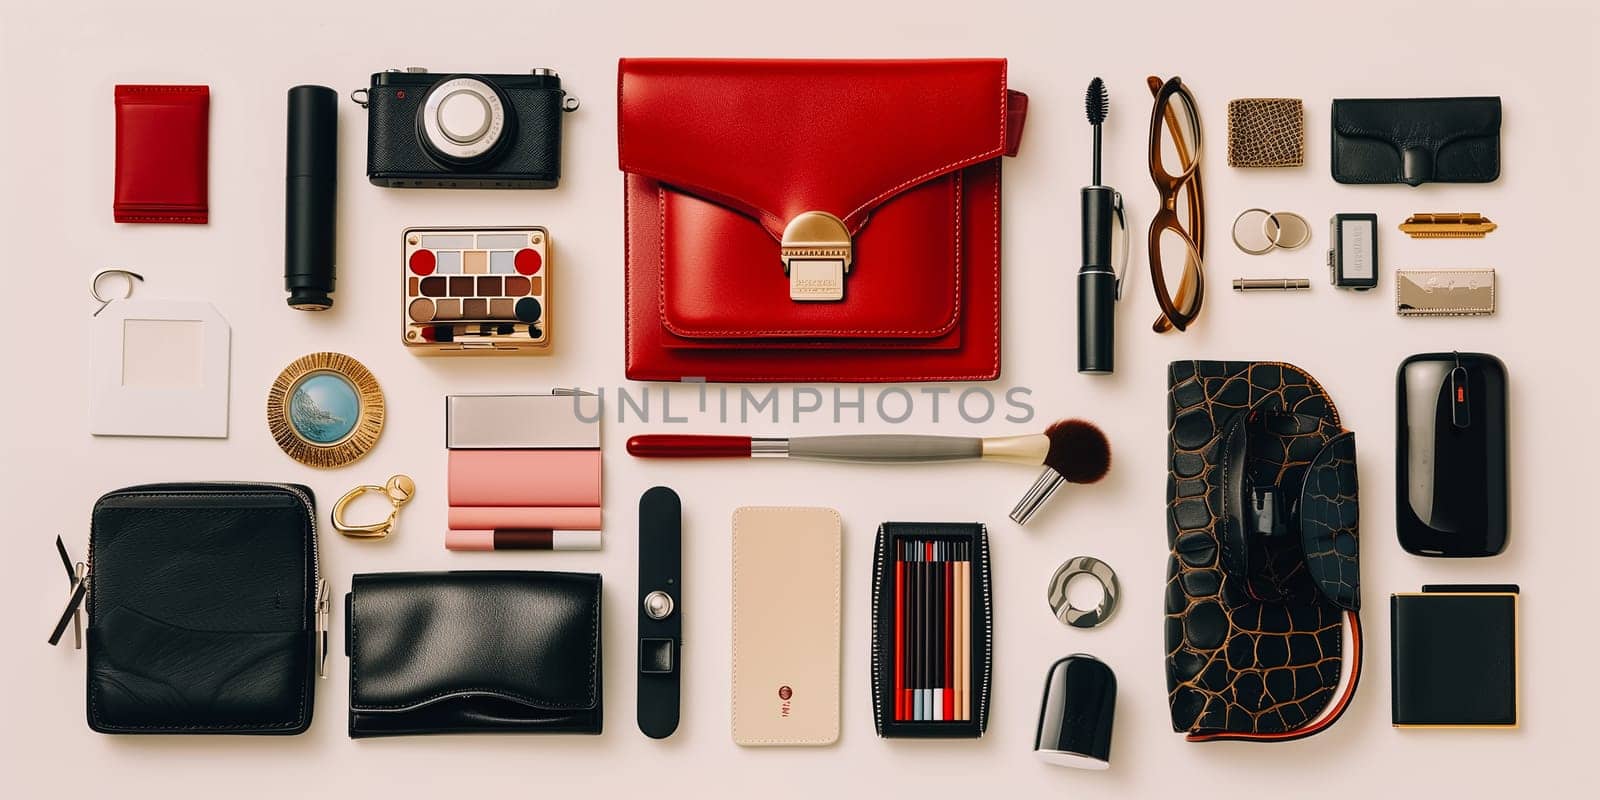 The knolling different women accessories.